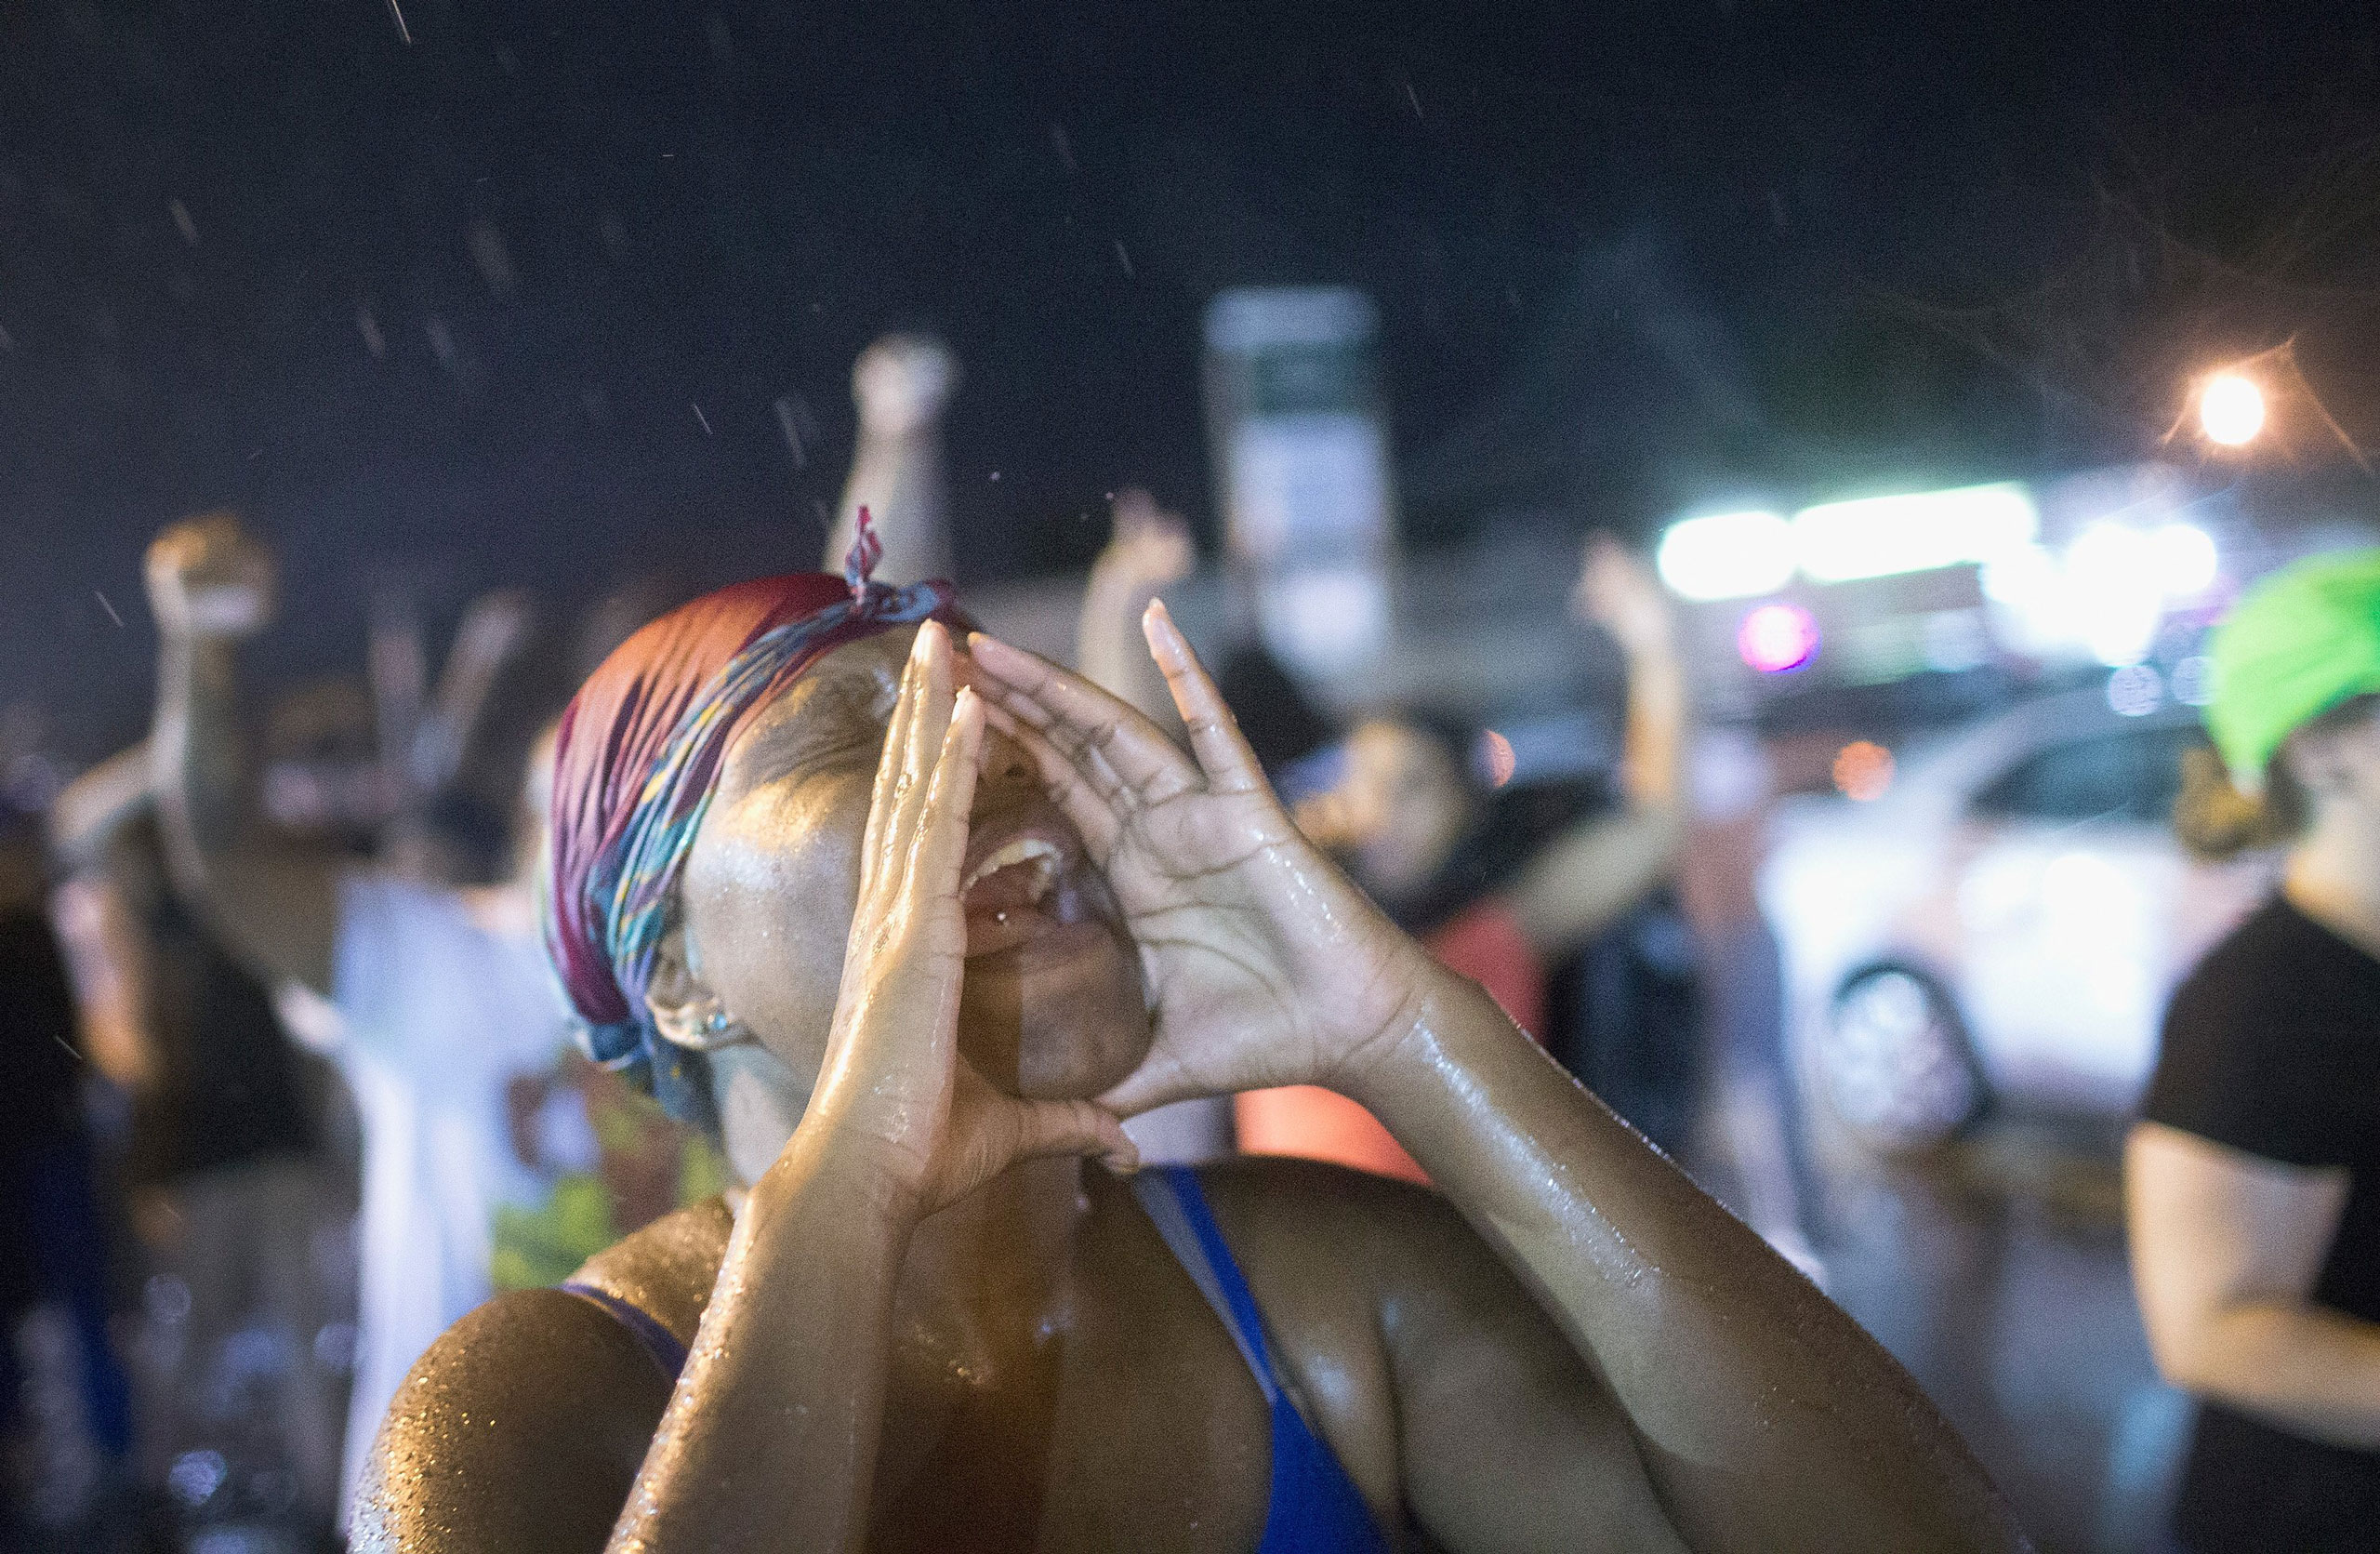 Gun fire broke out during protests in the evening of the anniversary of the shooting of Michael Brown along West Florrisant Streetin Ferguson, Mo., on August 9, 2015.